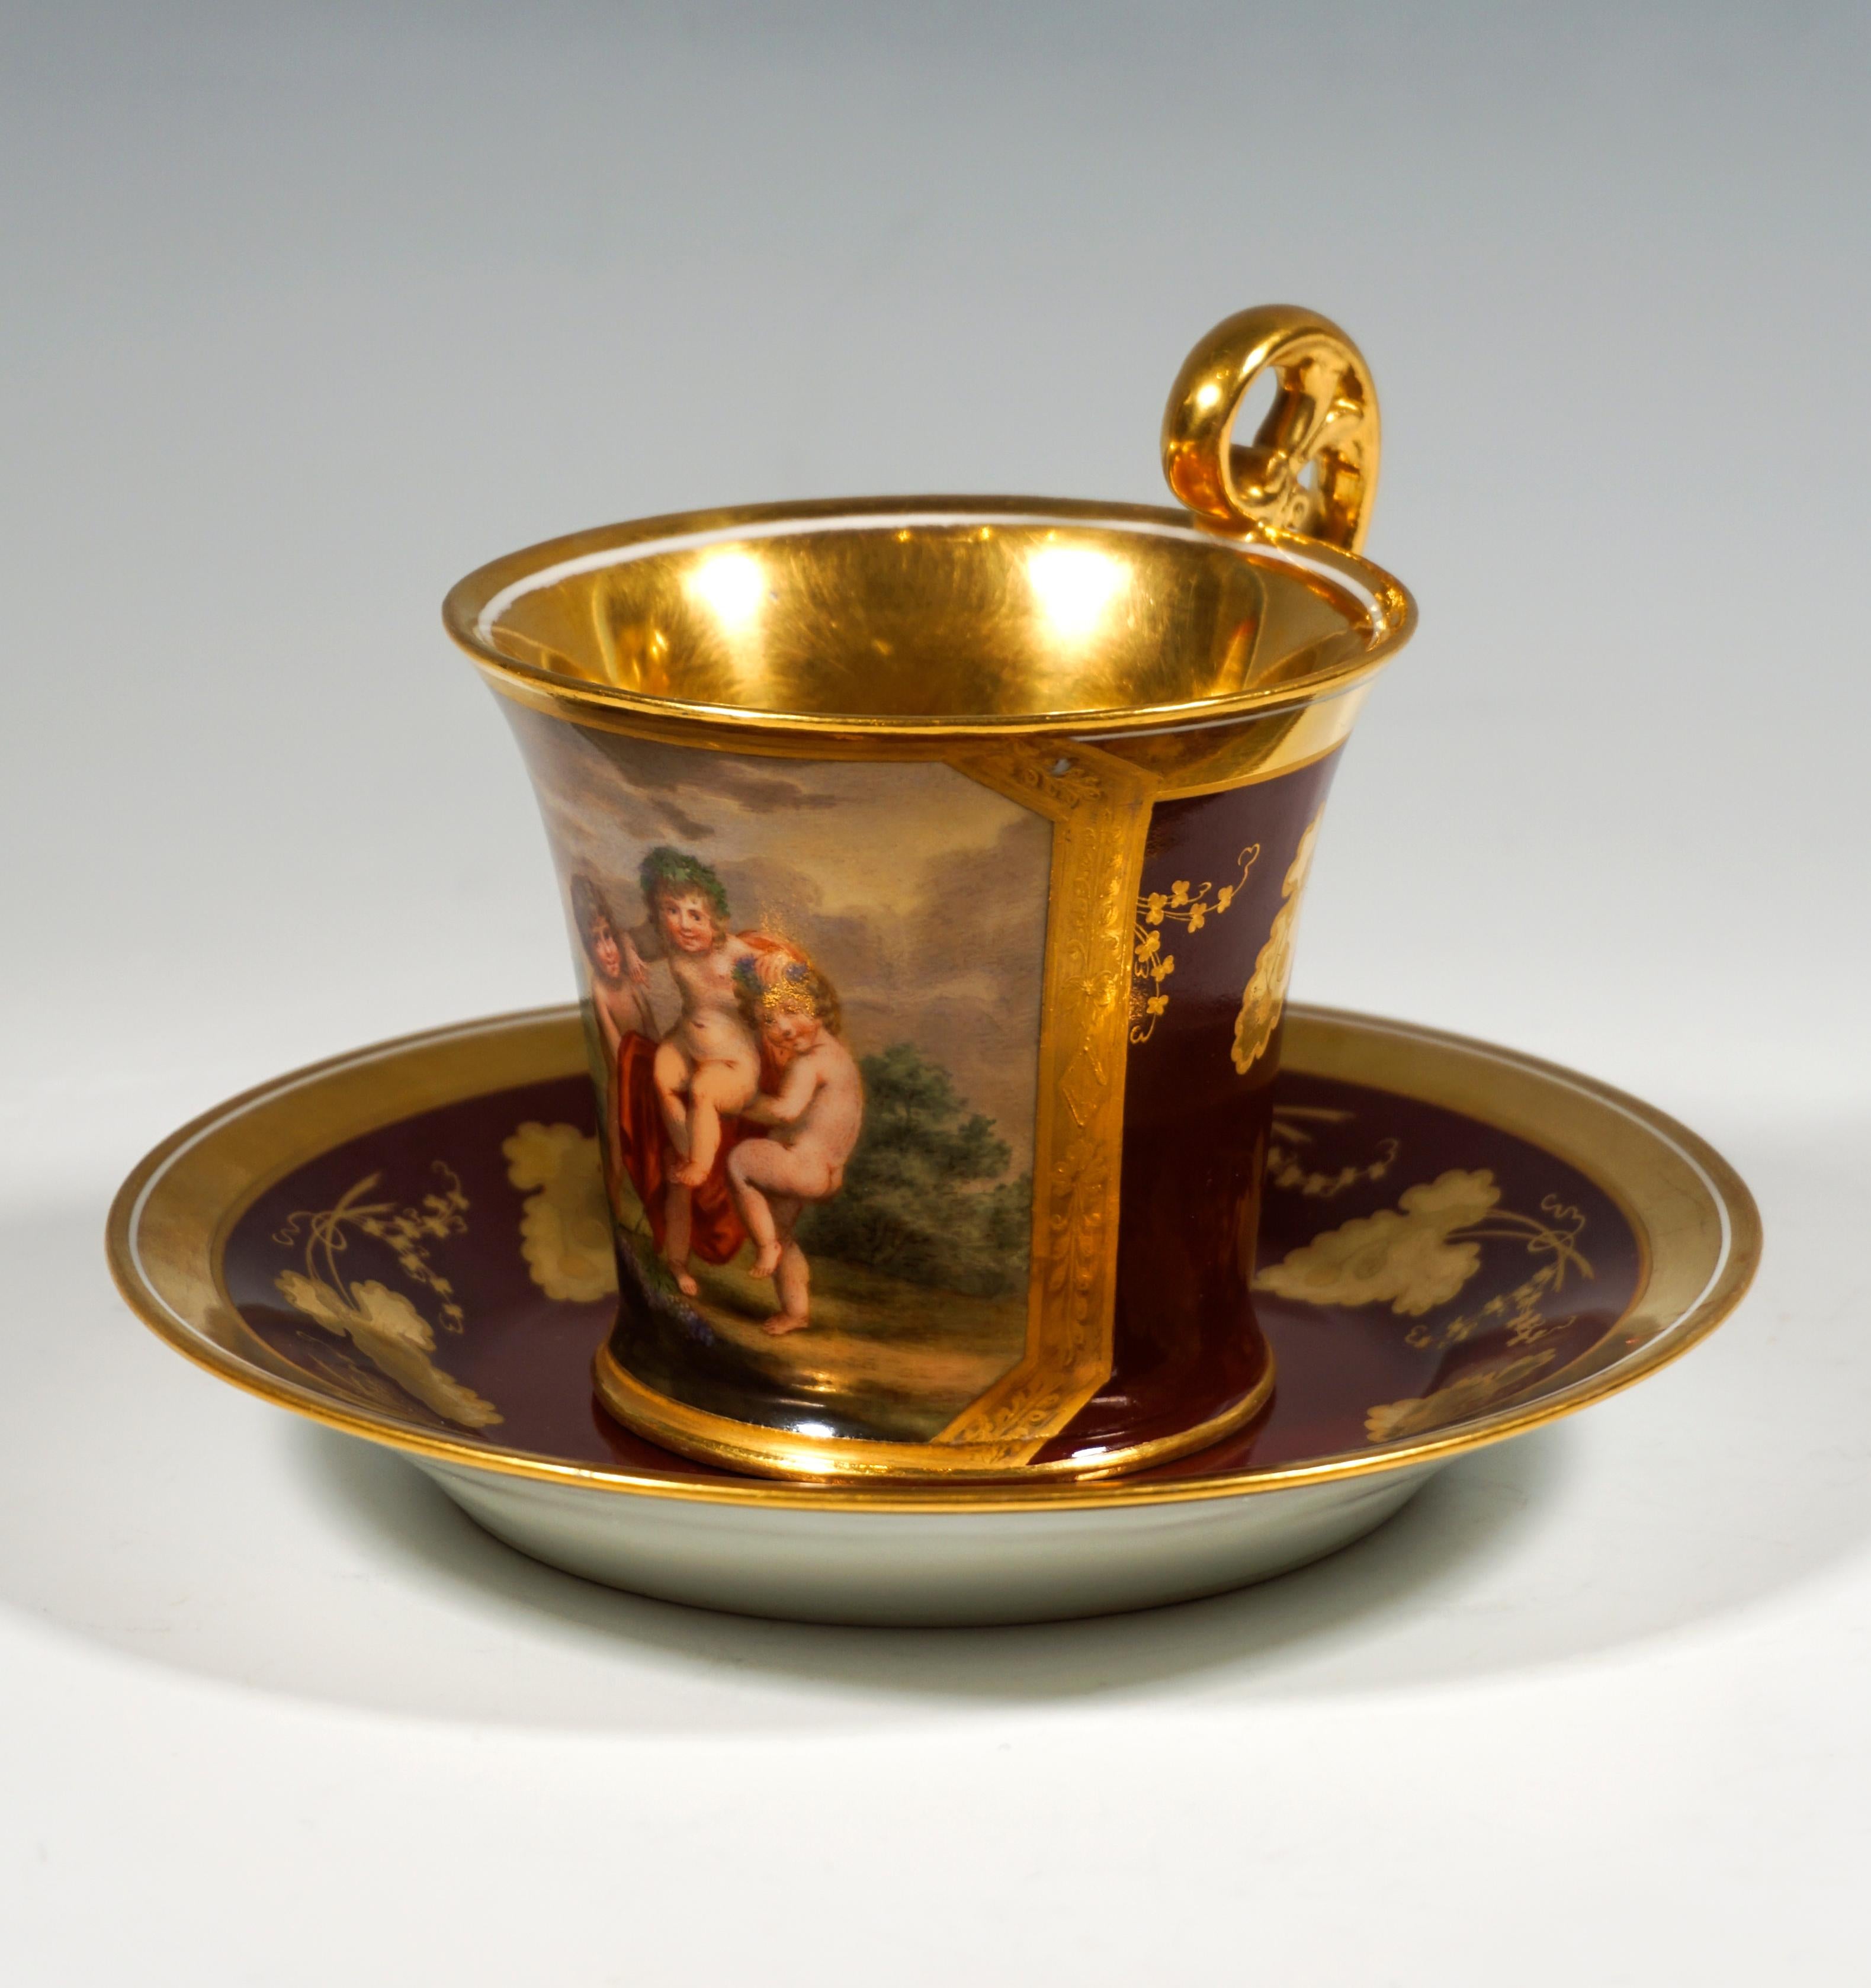 Austrian Viennese Imperial Porcelain Collecting Cup 'Three Cupids As Bacchants', 1816